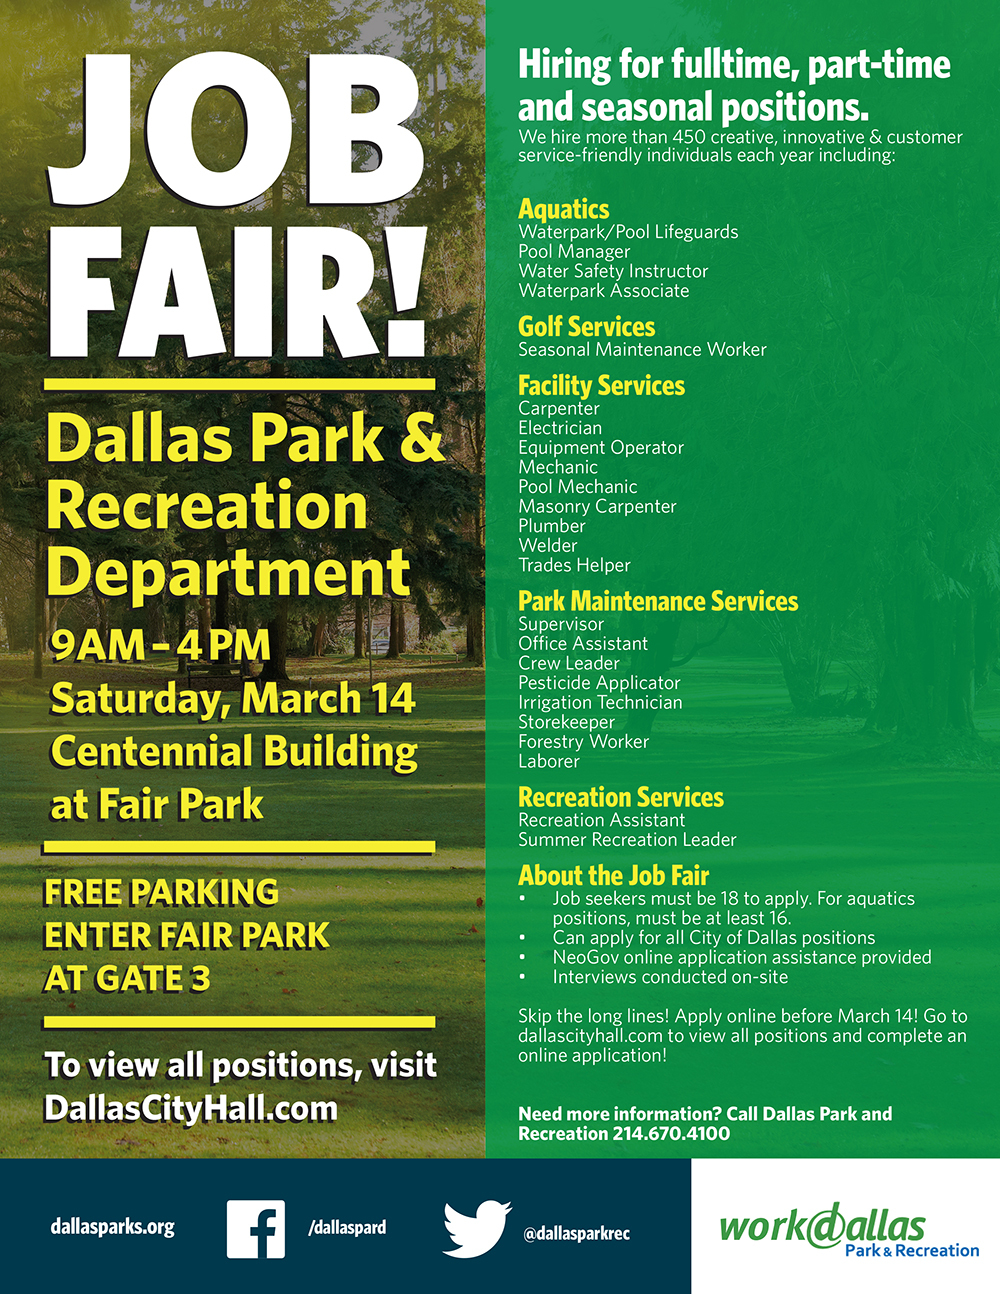 Parks and recreation tourism jobs